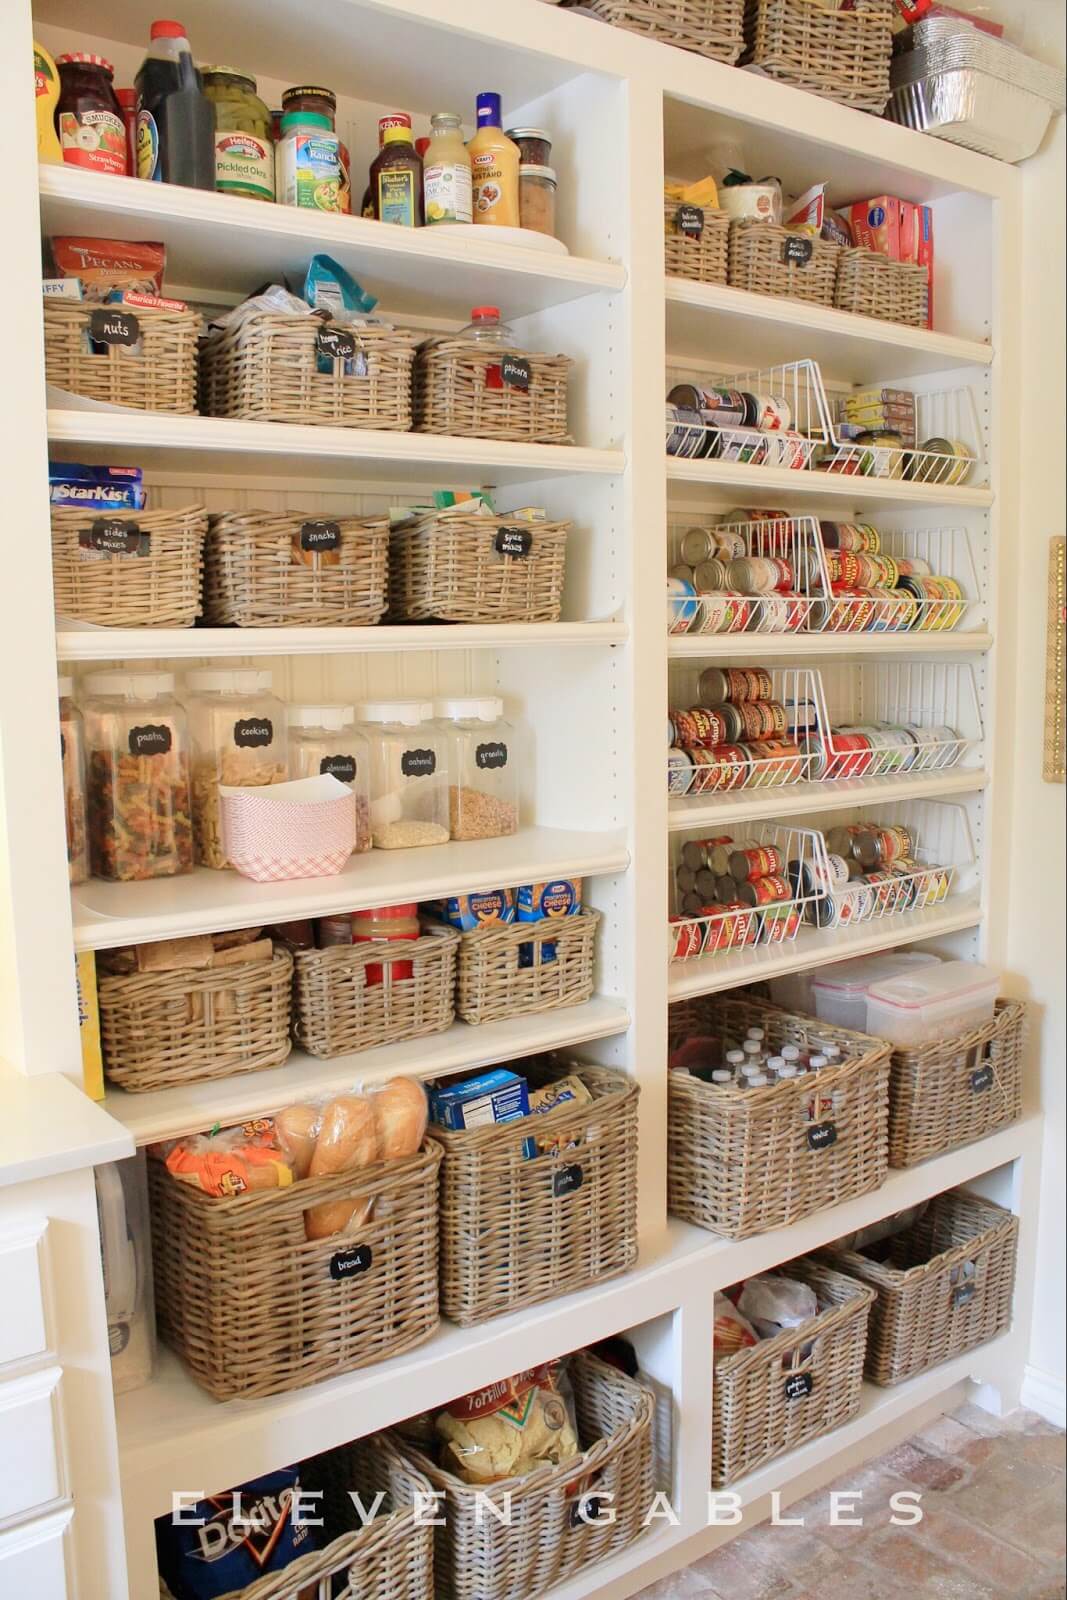 Lots of Square Baskets on Shelves